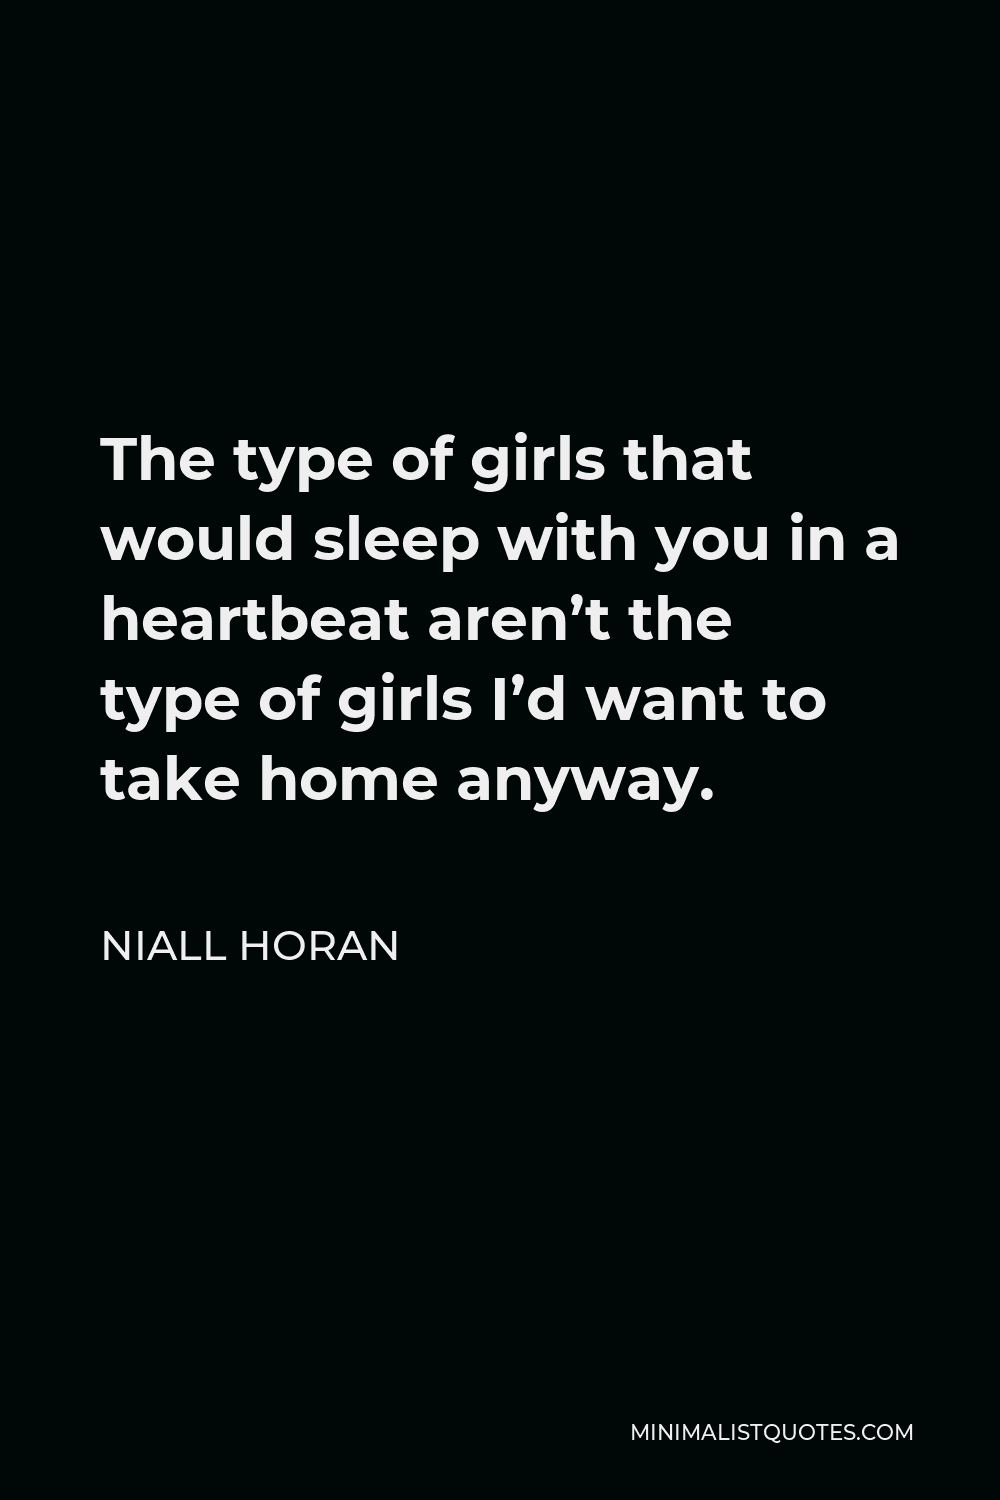 Niall Horan Quote - The type of girls that would sleep with you in a heartbeat aren’t the type of girls I’d want to take home anyway.